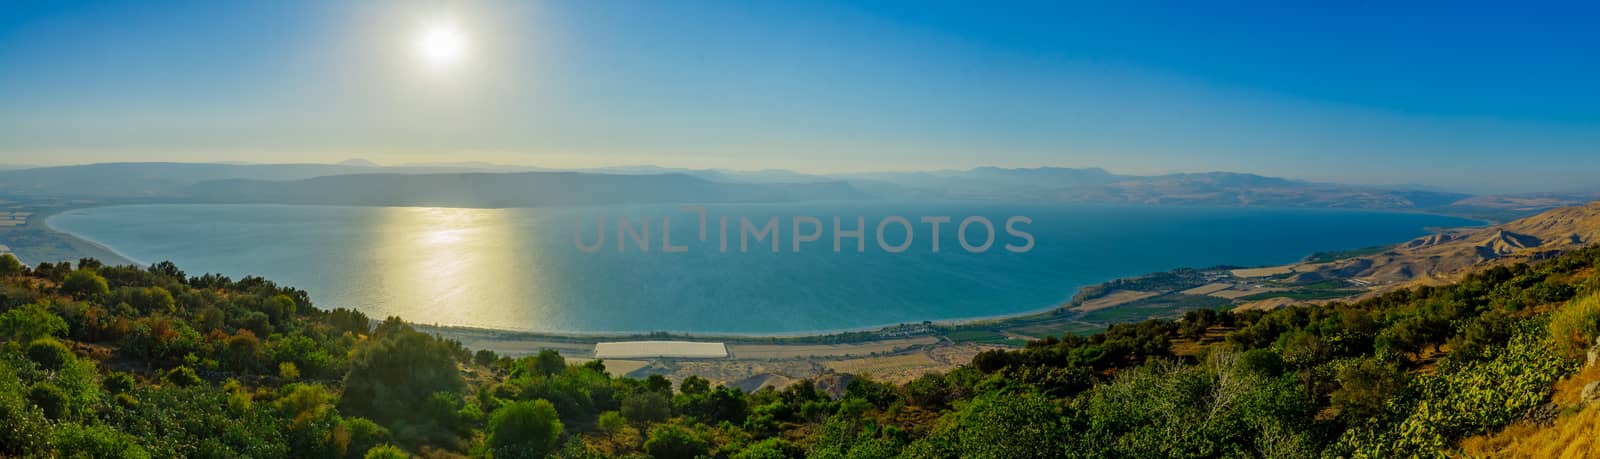 Panoramic view of the Sea of Galilee  by RnDmS